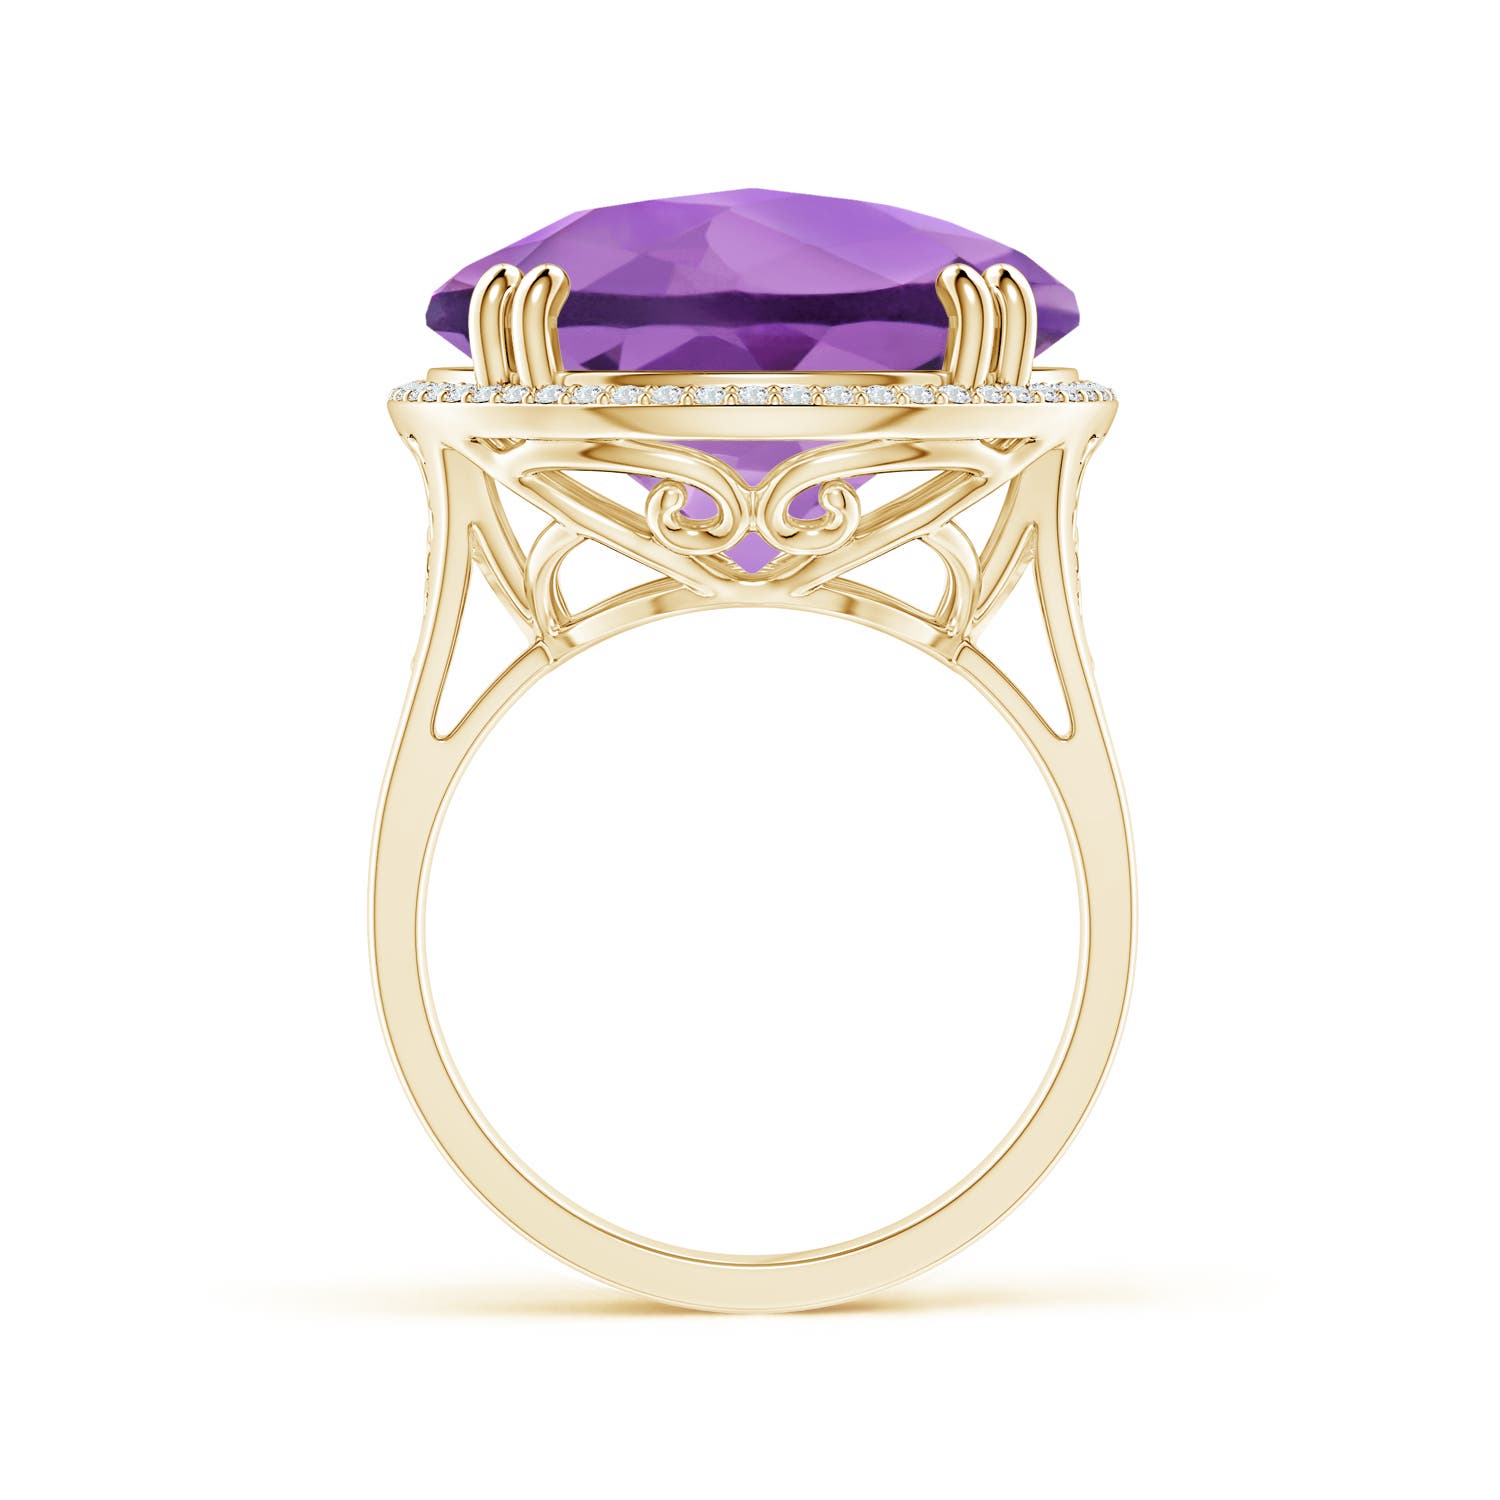 A - Amethyst / 18.23 CT / 14 KT Yellow Gold